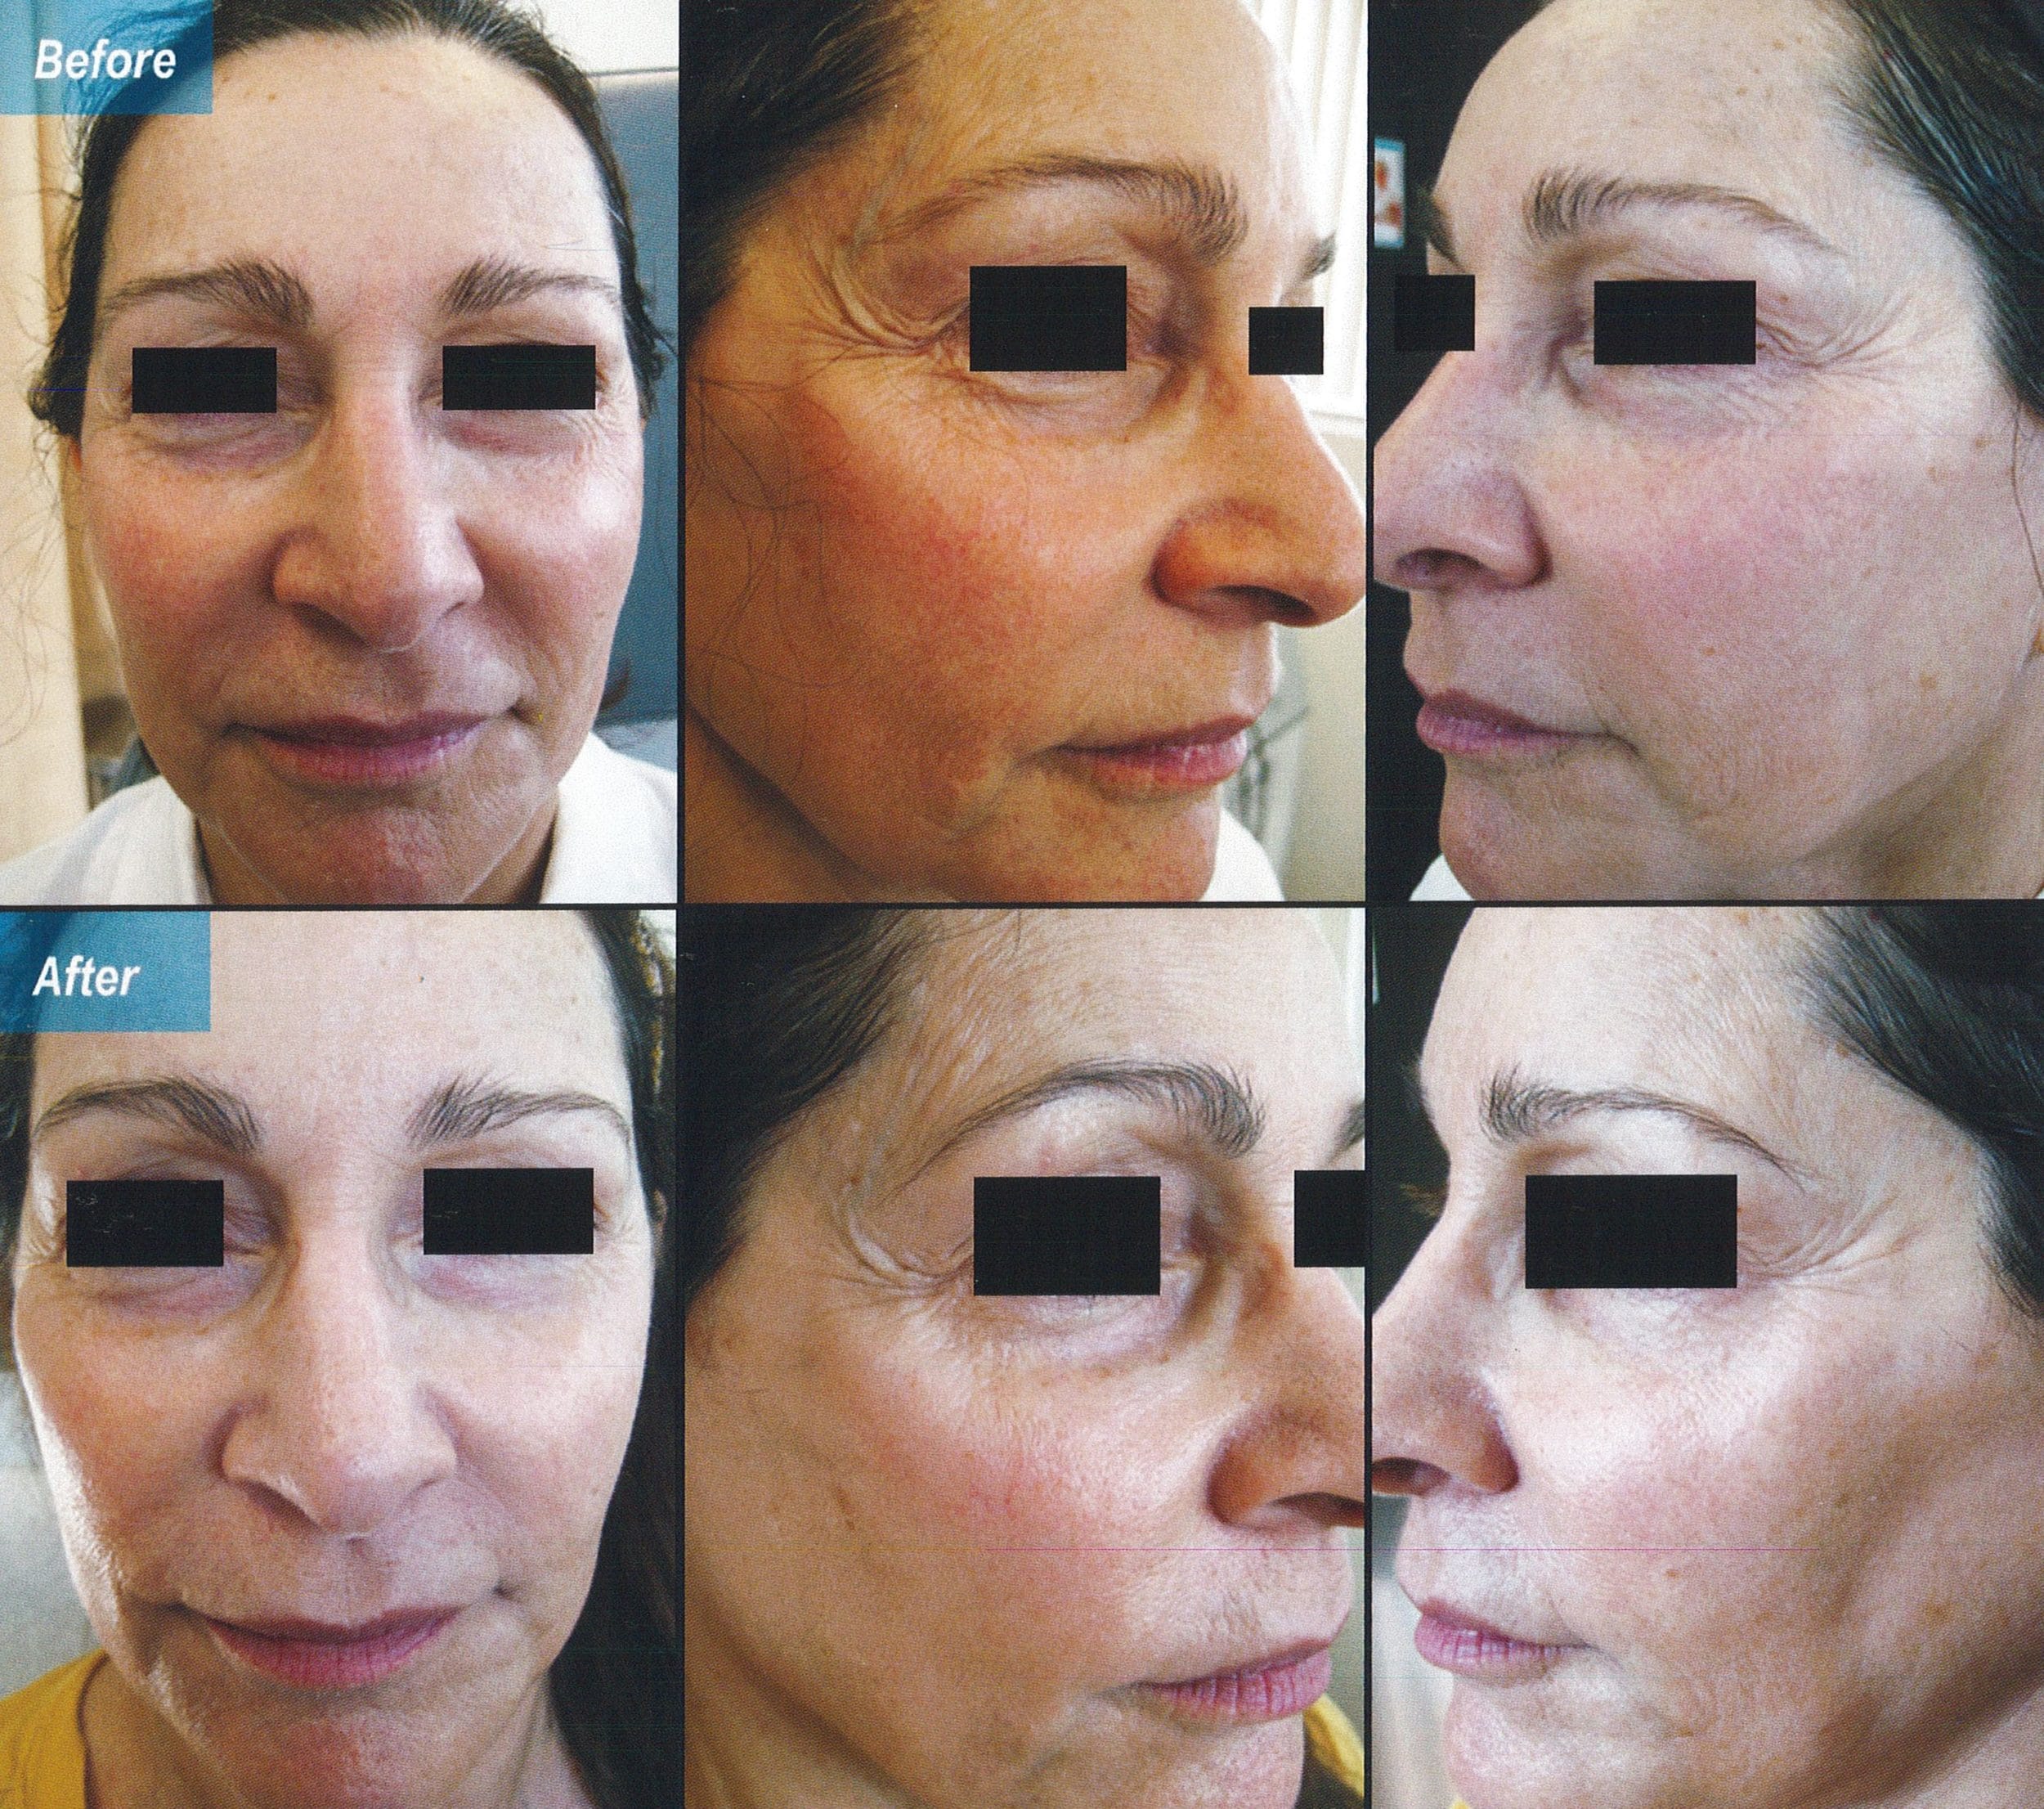 female patient before and 3 Weeks after chemical peel, with clearer skin after